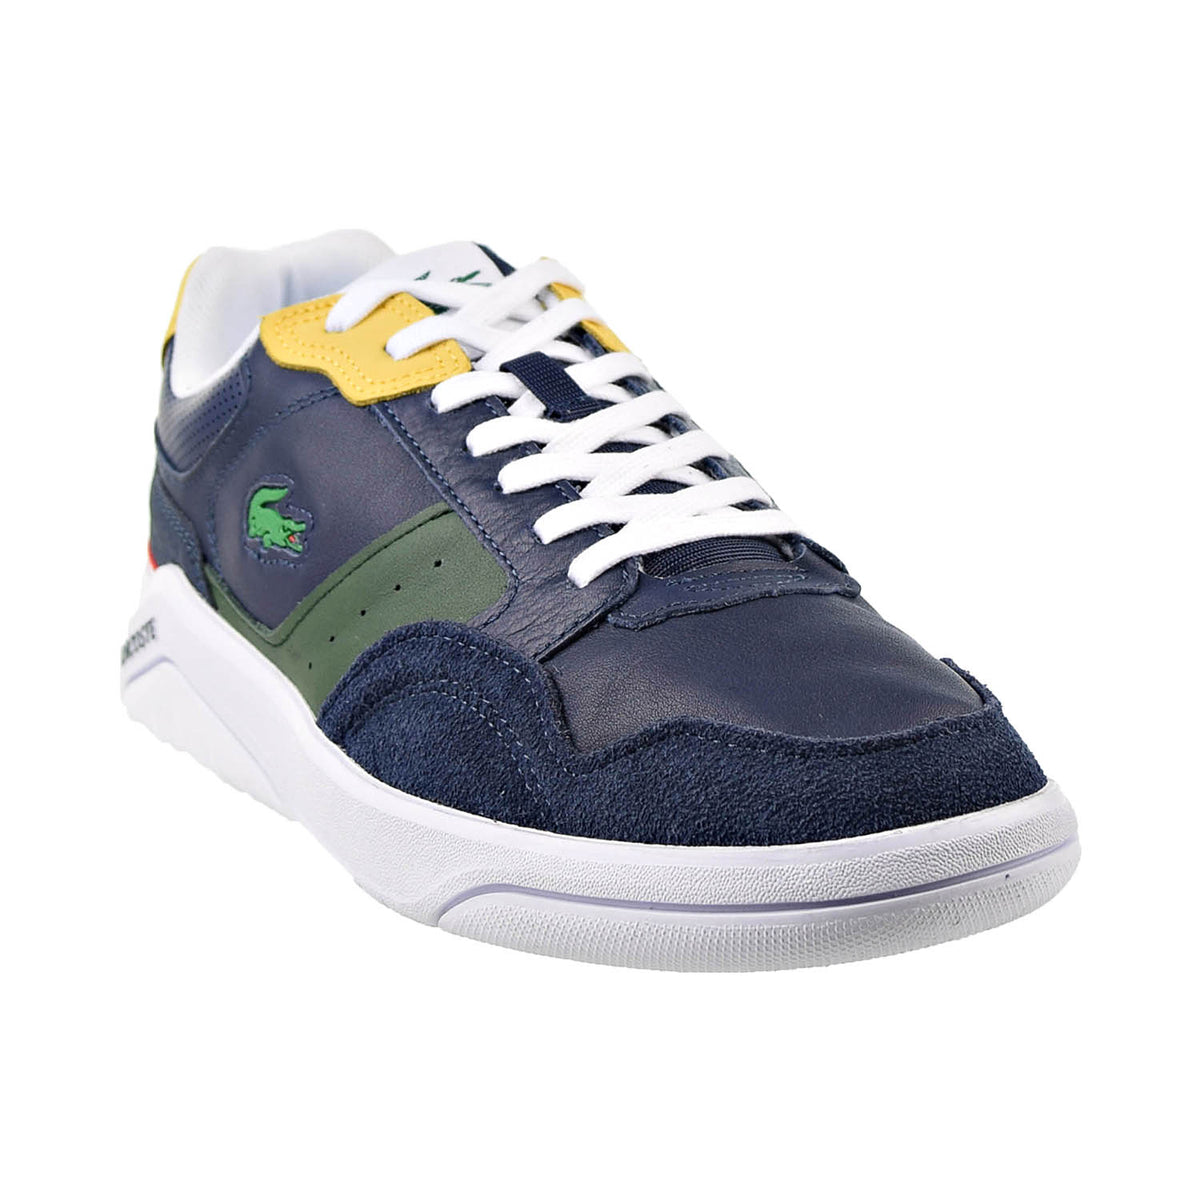 Lacoste Men's GAME ADVANCE LUXE Sneakers 742SMA0013 147